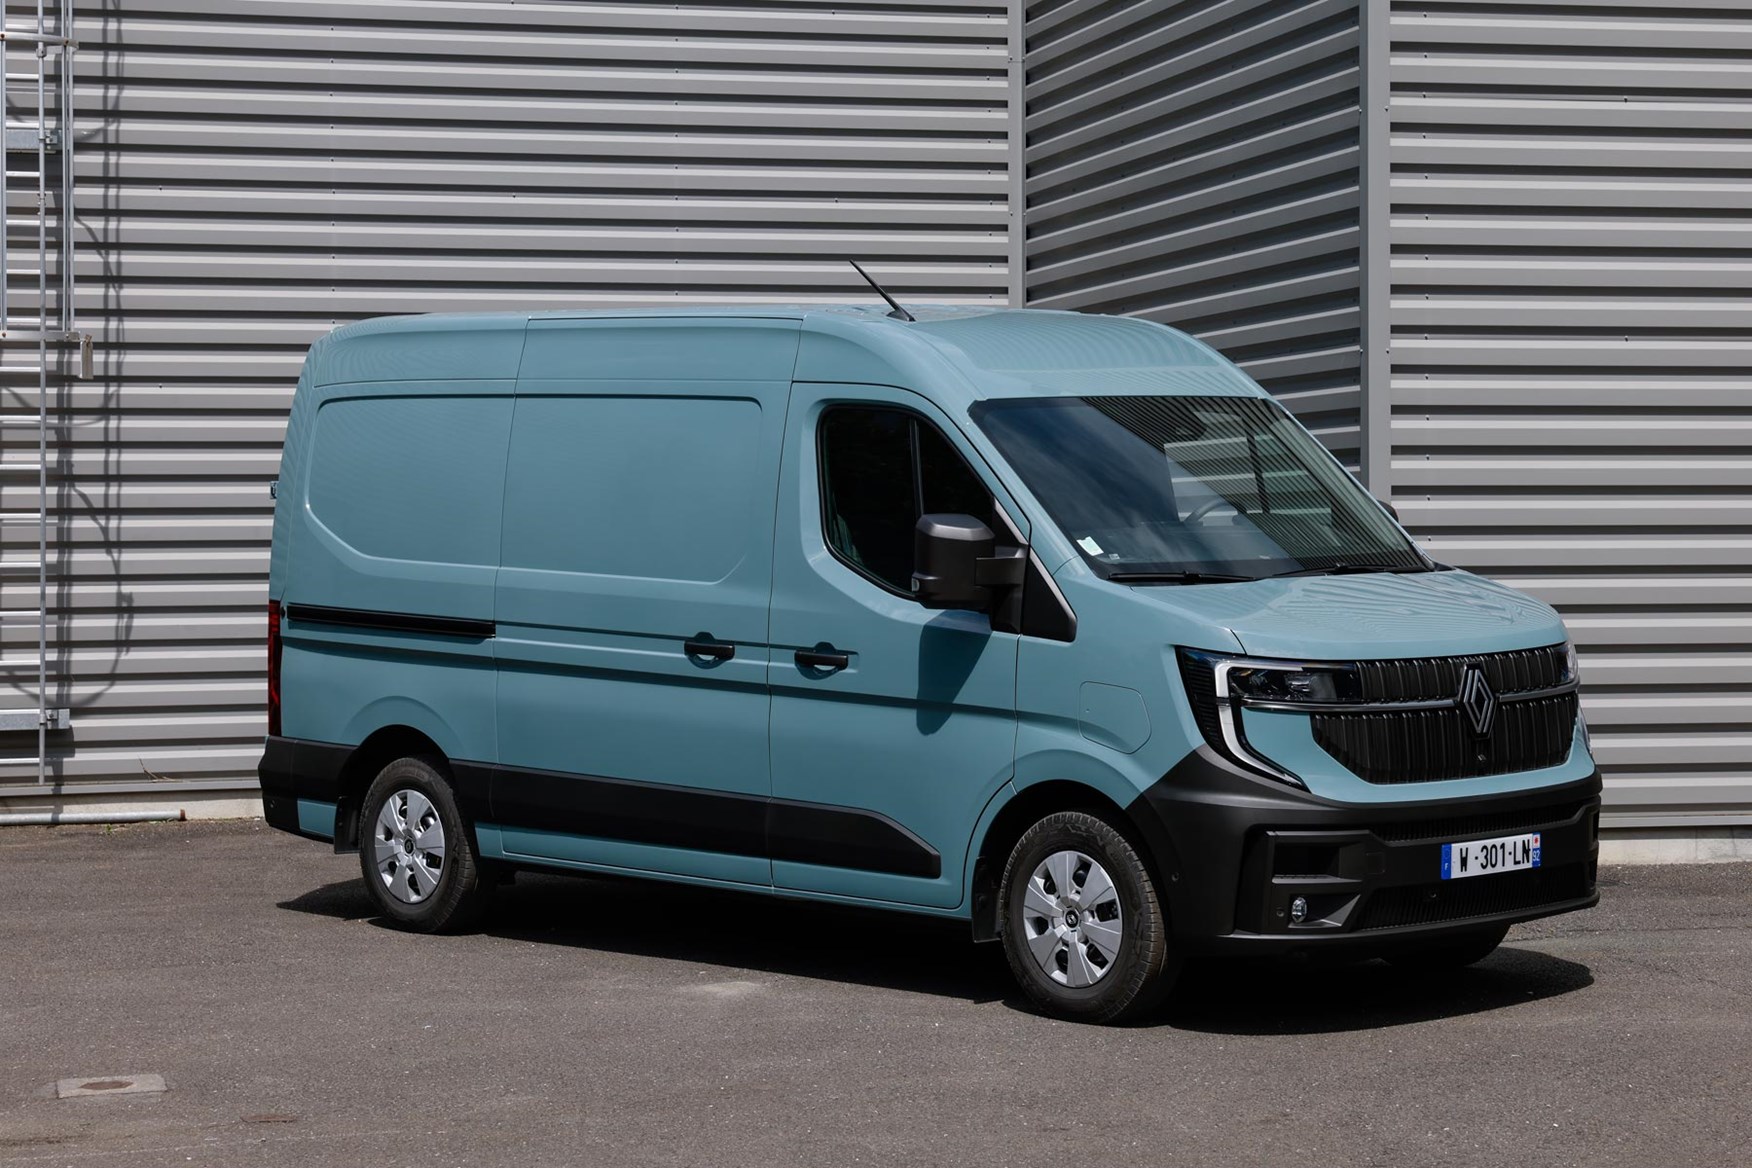 The Renault Master has been totally redesigned from top to bottom.